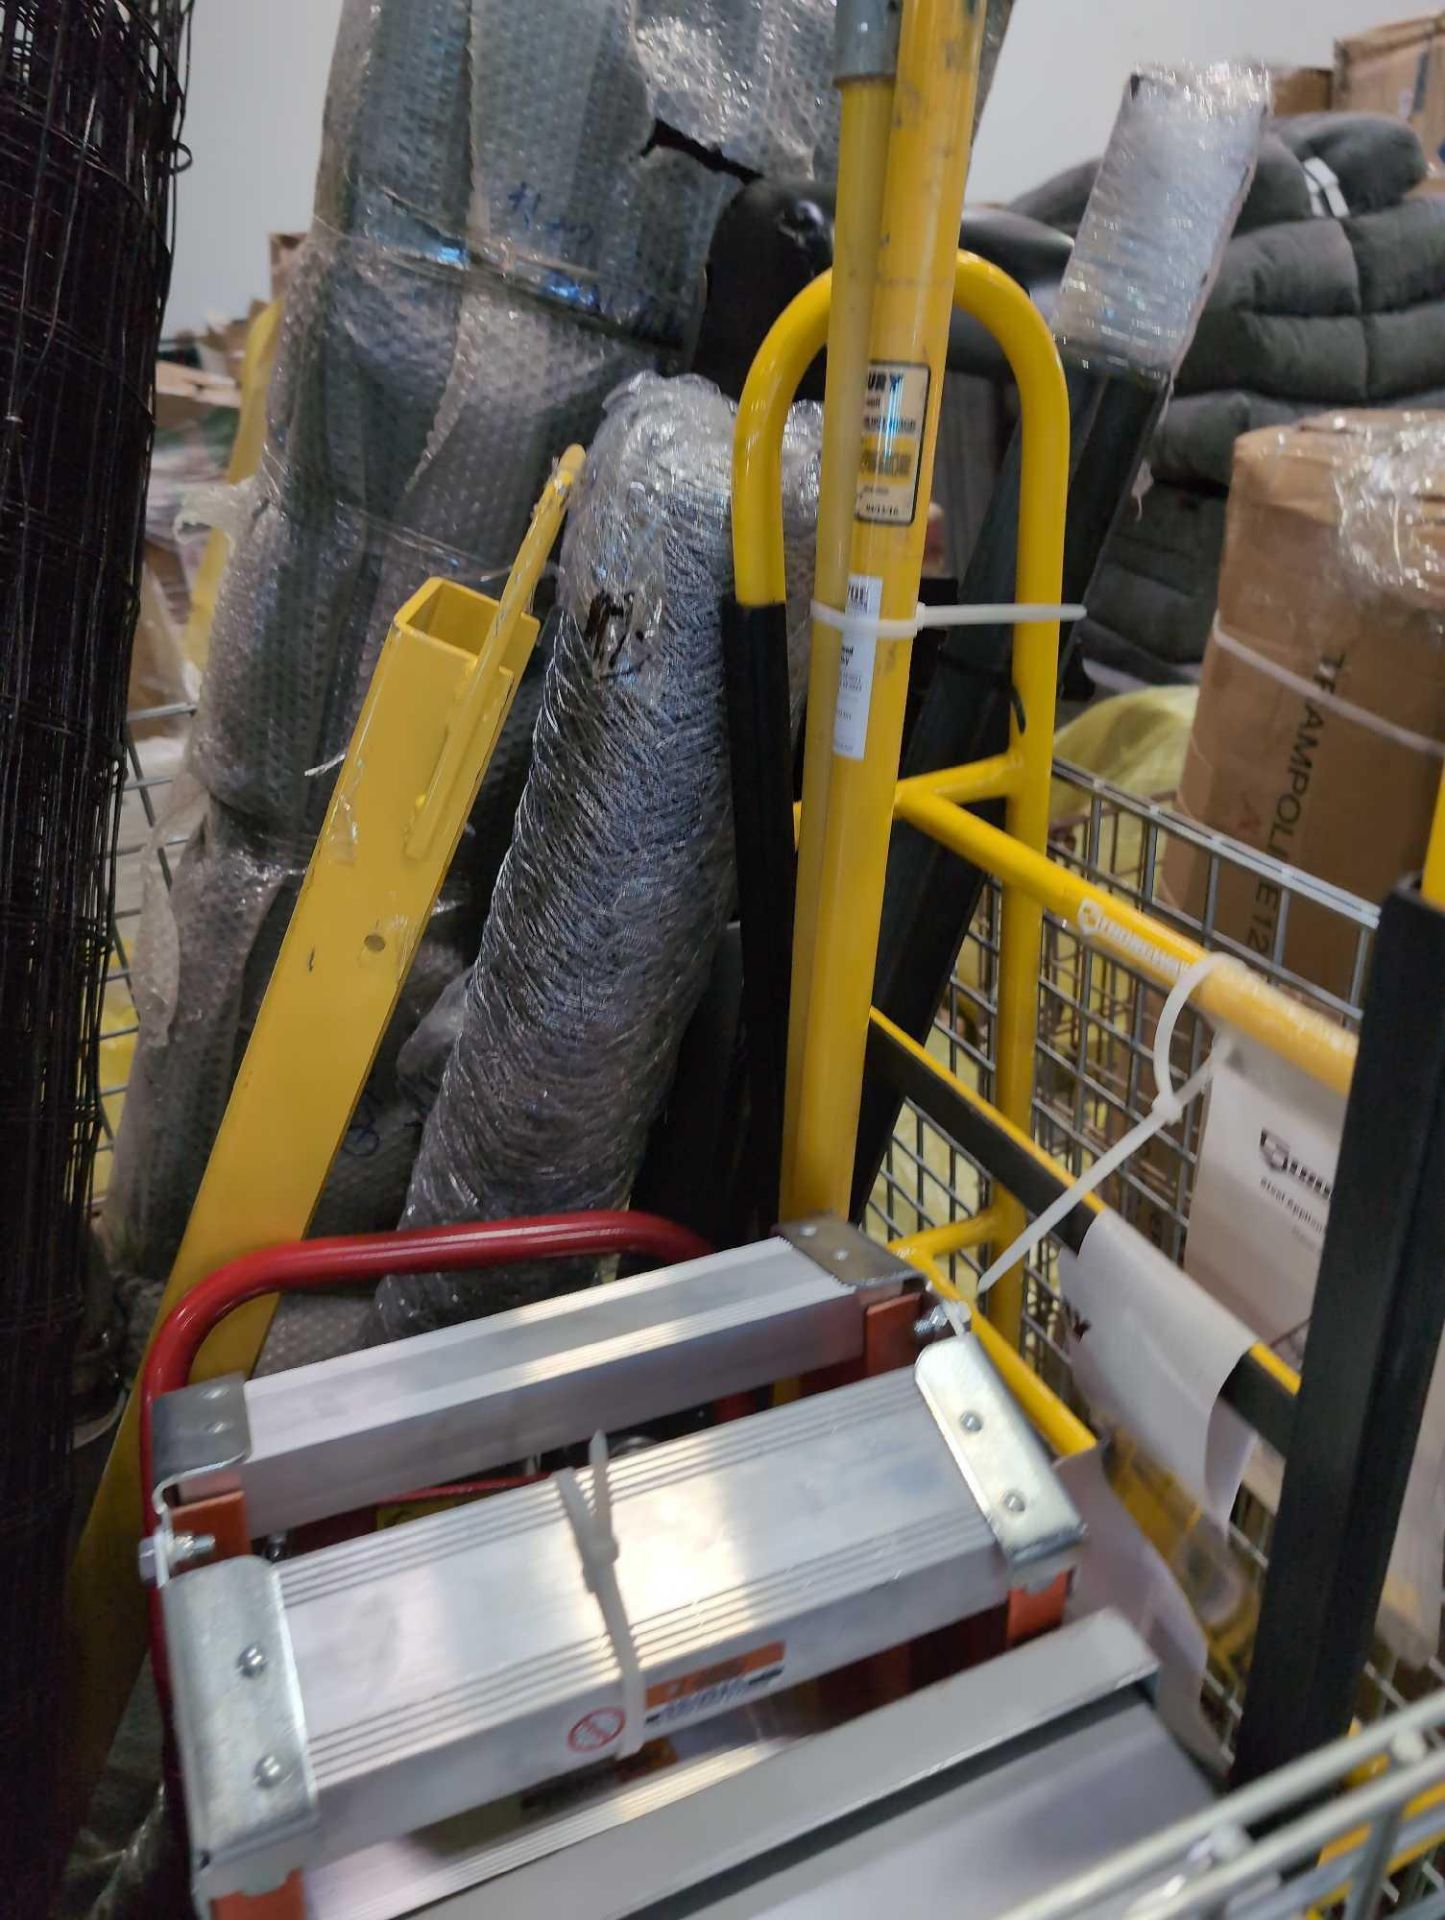 strongway still appliance hand truck, step ladders, fencing and other items - Image 2 of 7